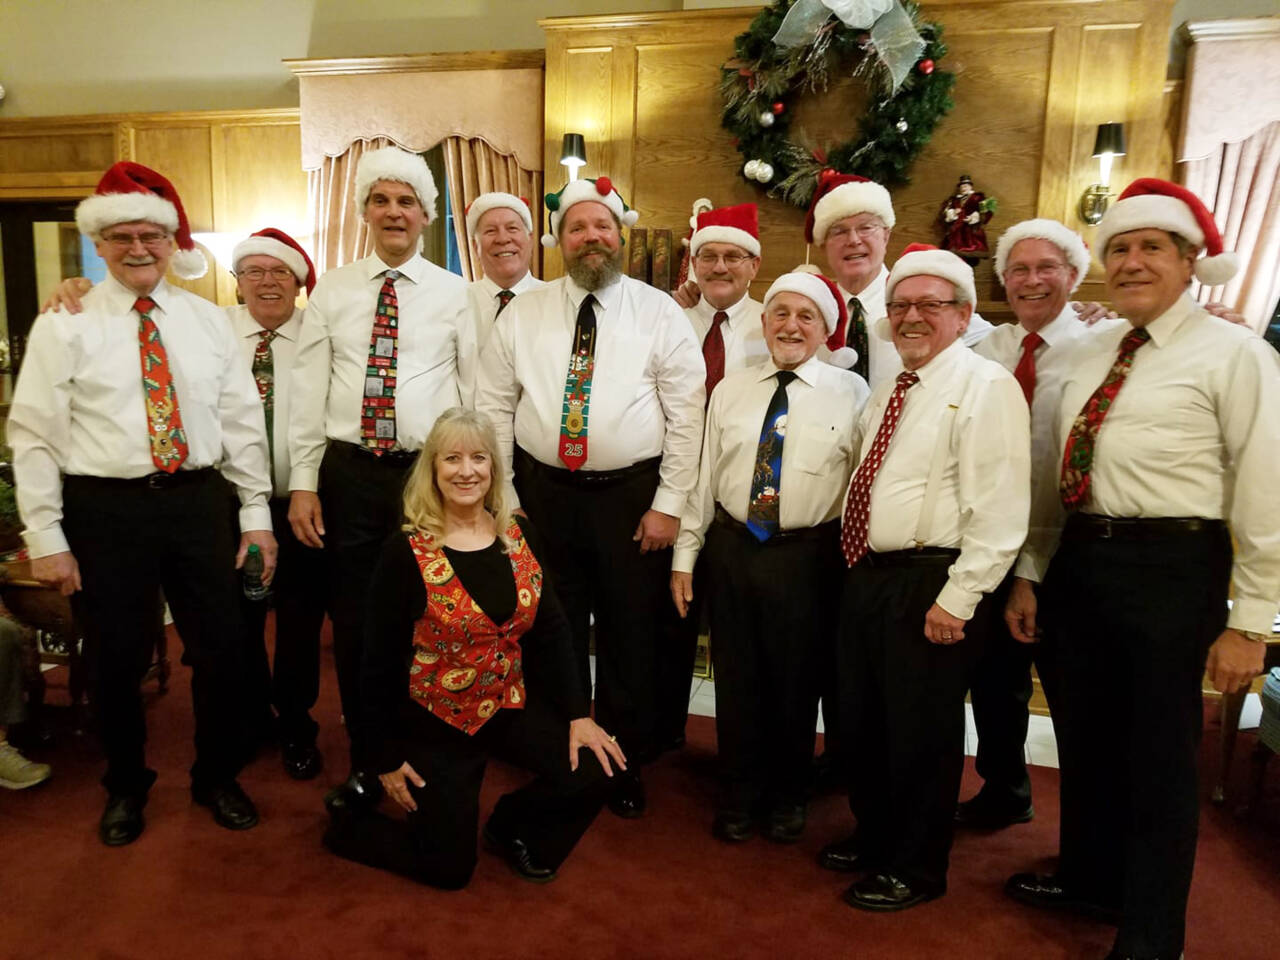 Submitted photo
Juan de Fuca Harmony will be singing Christmas songs and carols around downtown during the First Friday Art Walk Sequim event on Dec. 2.